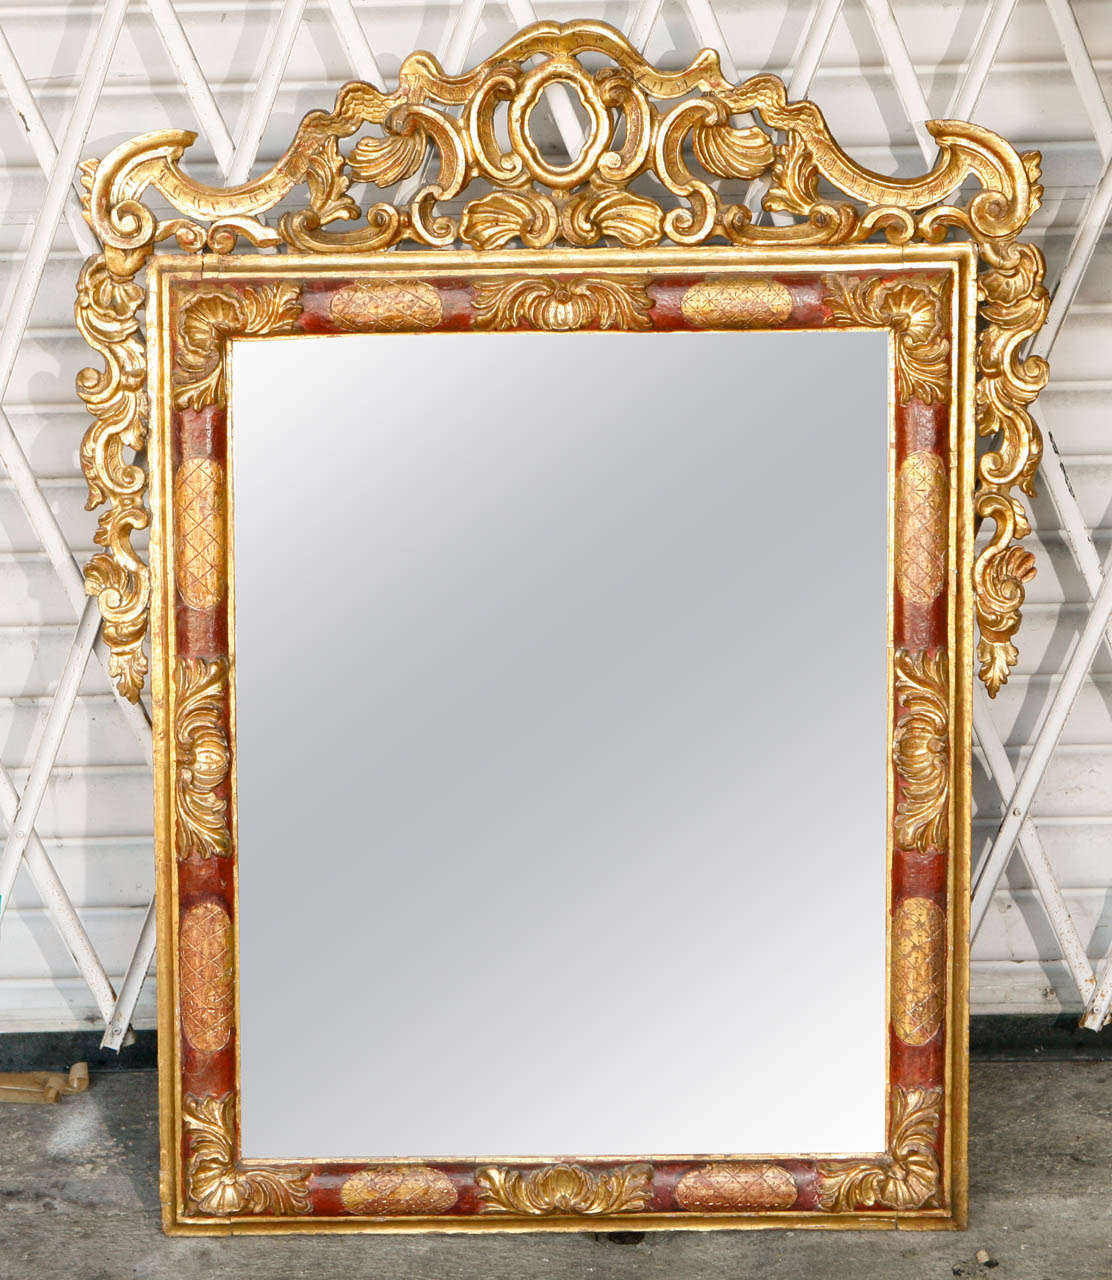 Late 18th century - early 19th century Italian carved giltwood mirror with beautiful red and gilt painted accent.